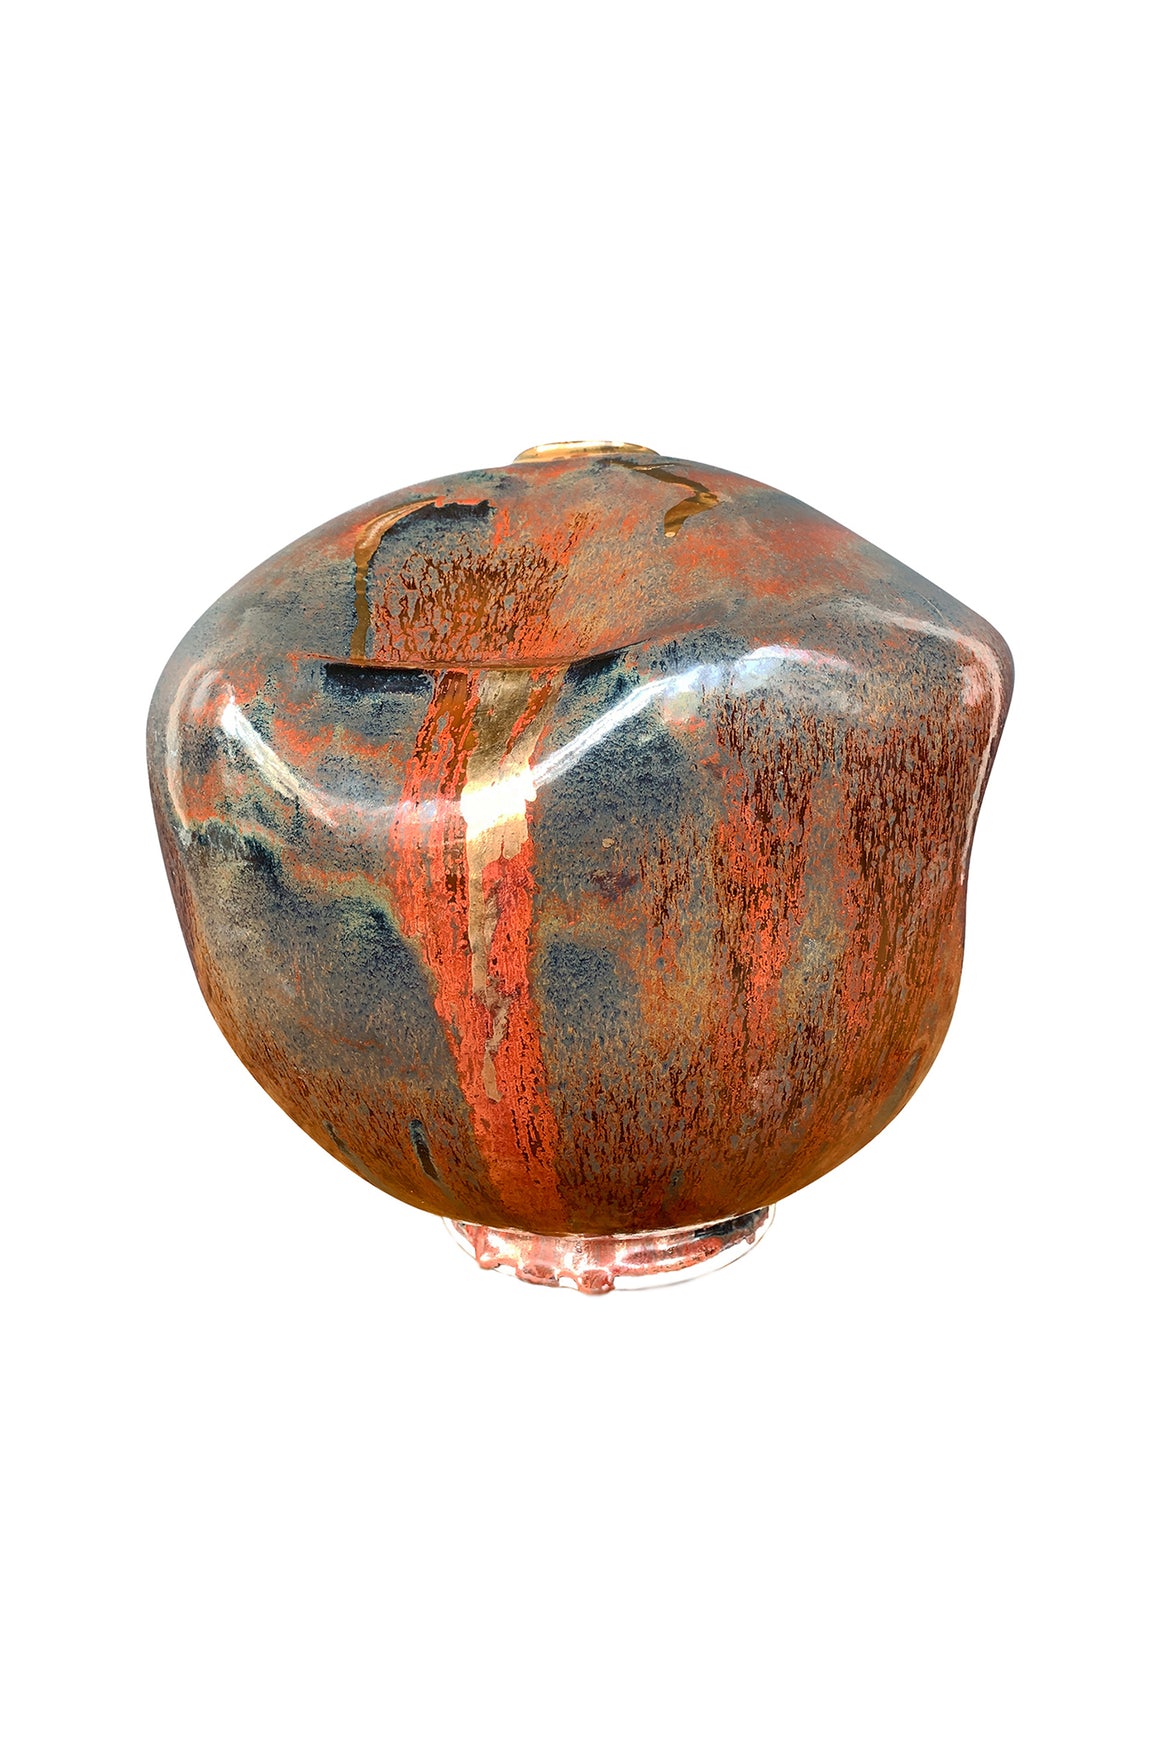 Thom Lussier Ceramic Vessel #3 - From the Golden Patina Collection